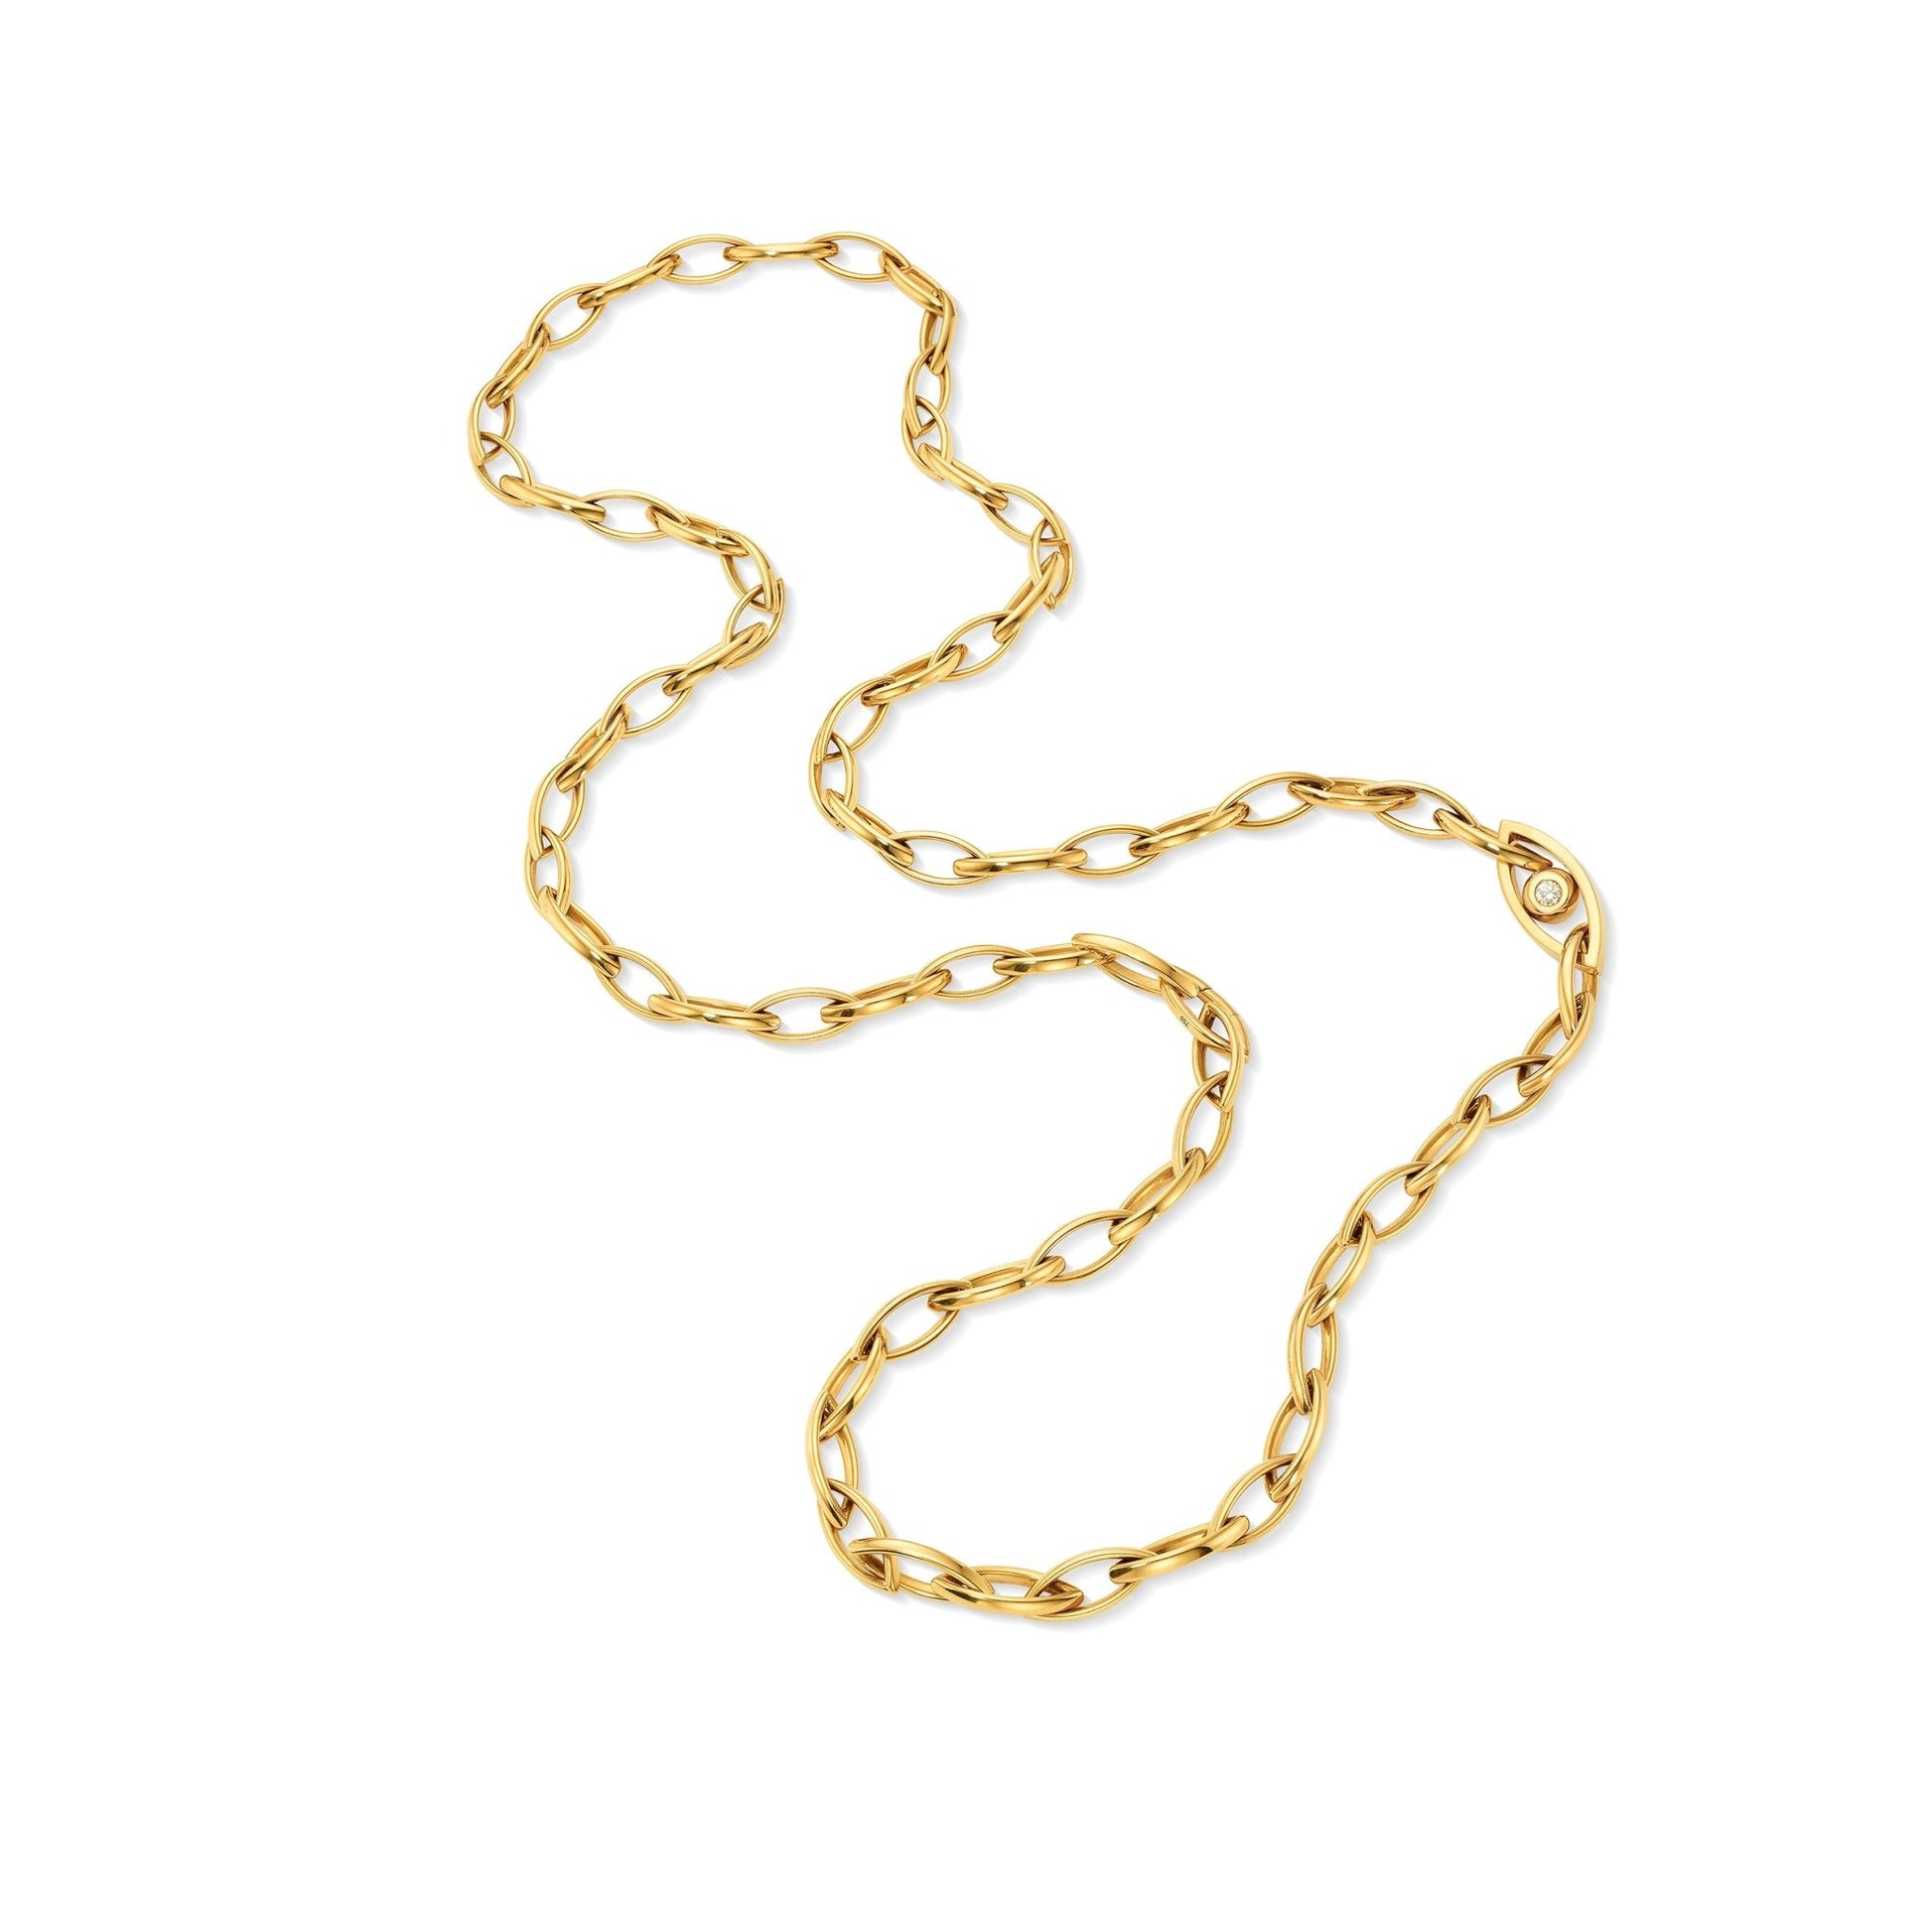 Yellow Gold Reflections Link Necklace with White Diamonds - Cadar